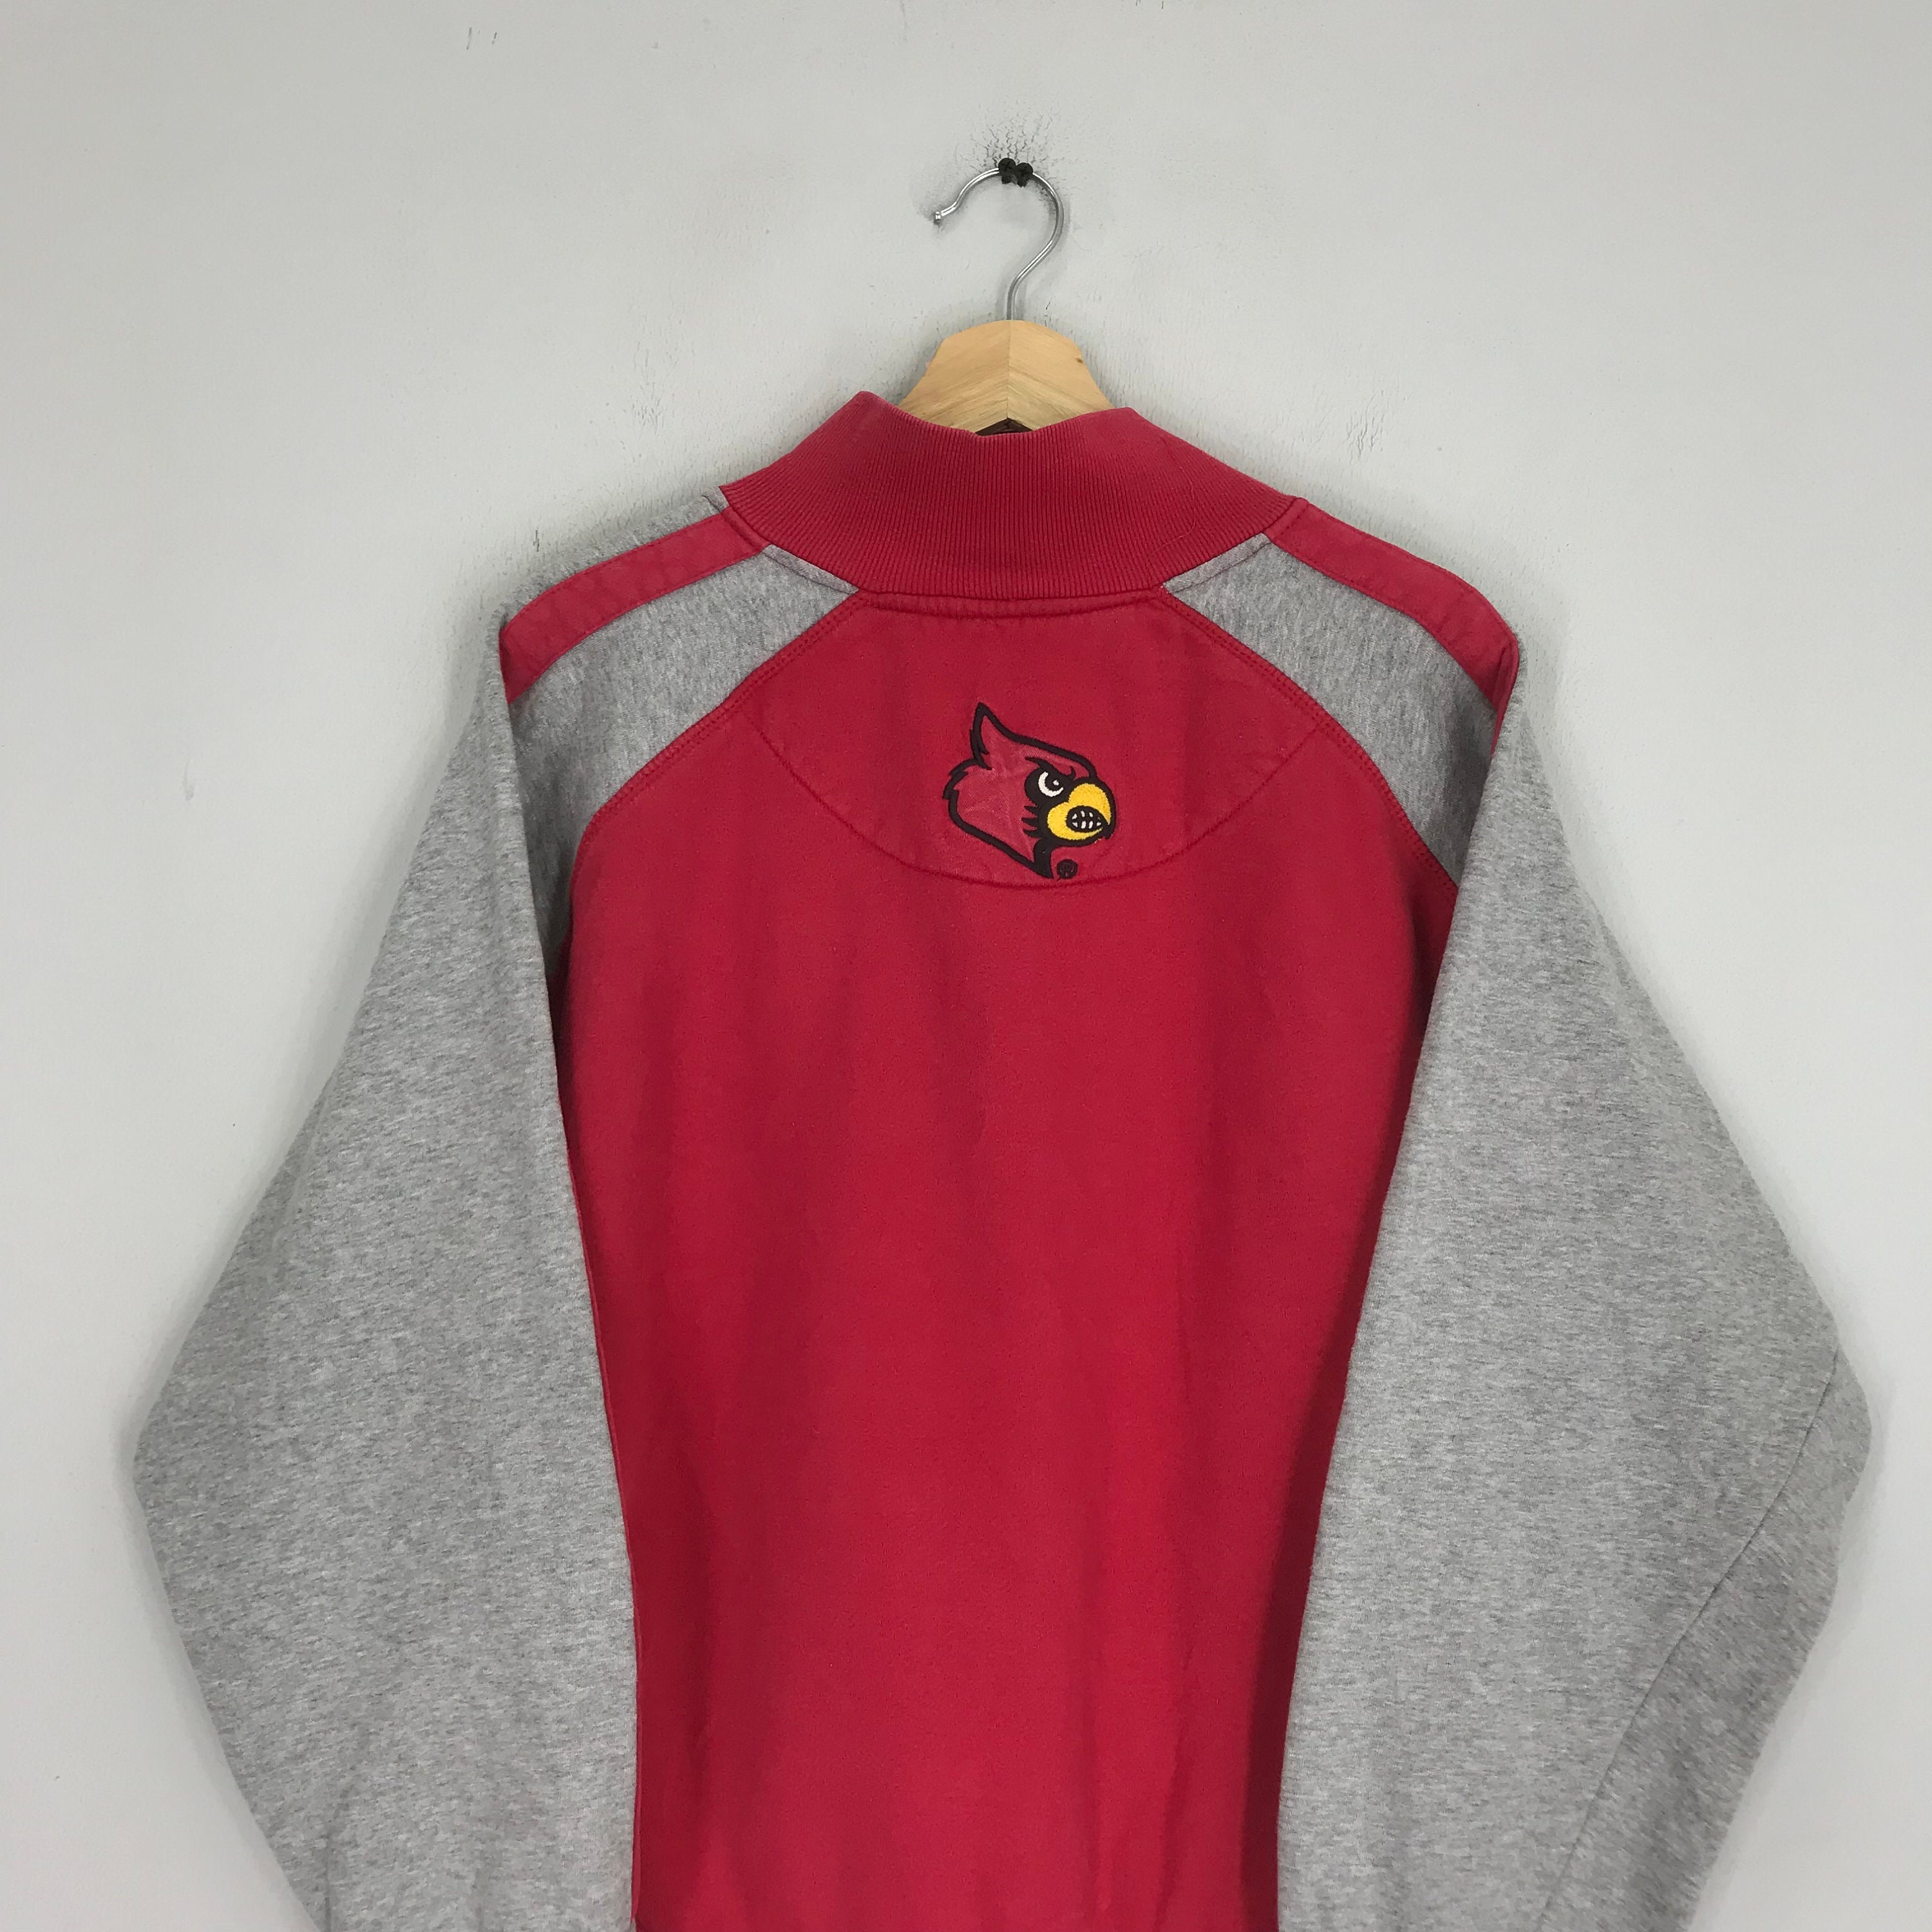 Vintage 70s Womens Medium Spell Out University of Louisville Knit Sweater  Red